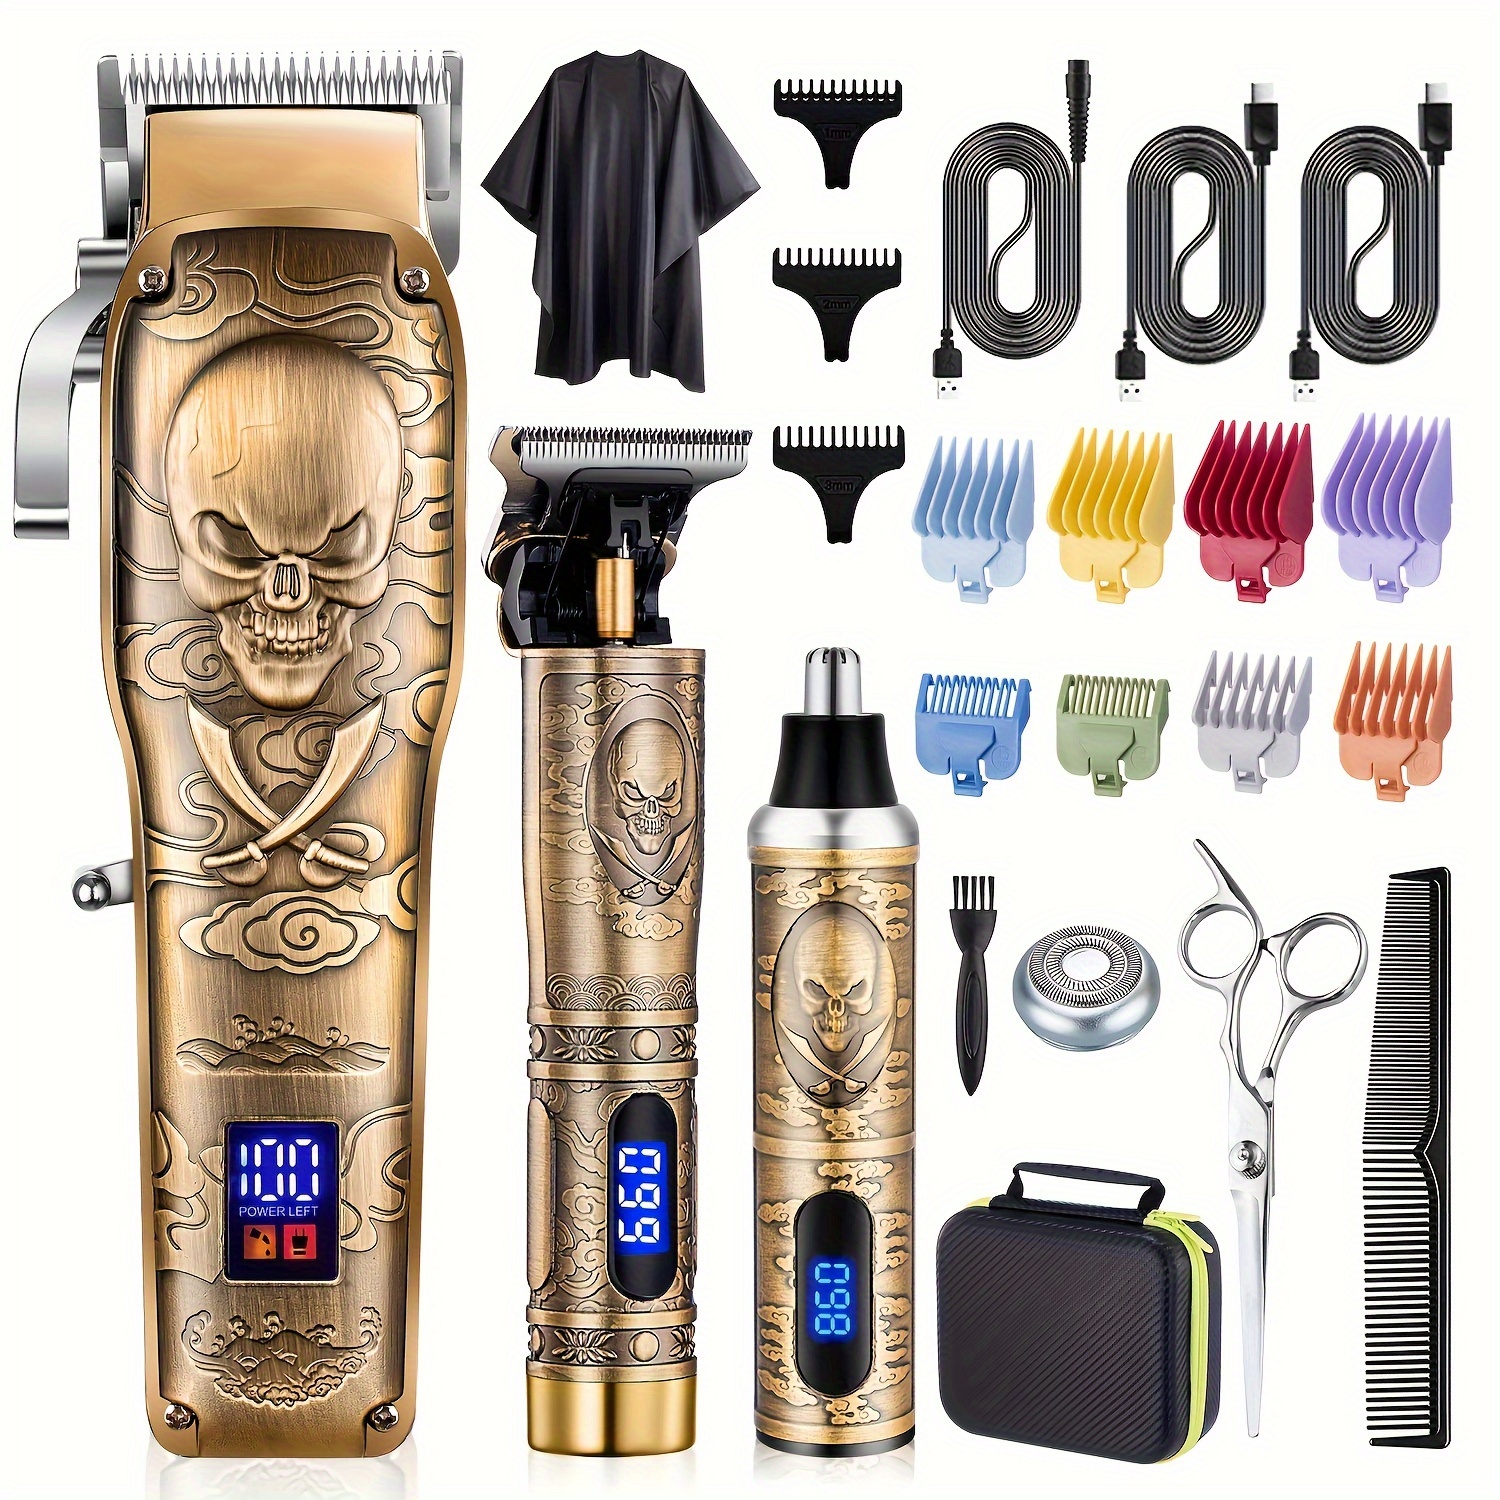 

Professional Barber Clippers Set, Cordless Hair Trimmer For Men, Rechargeable Men's Hair Cutting Kit, Beard Trimmer & Nose Hair Trimmer Set For Father's Day Gift Birthday Gift